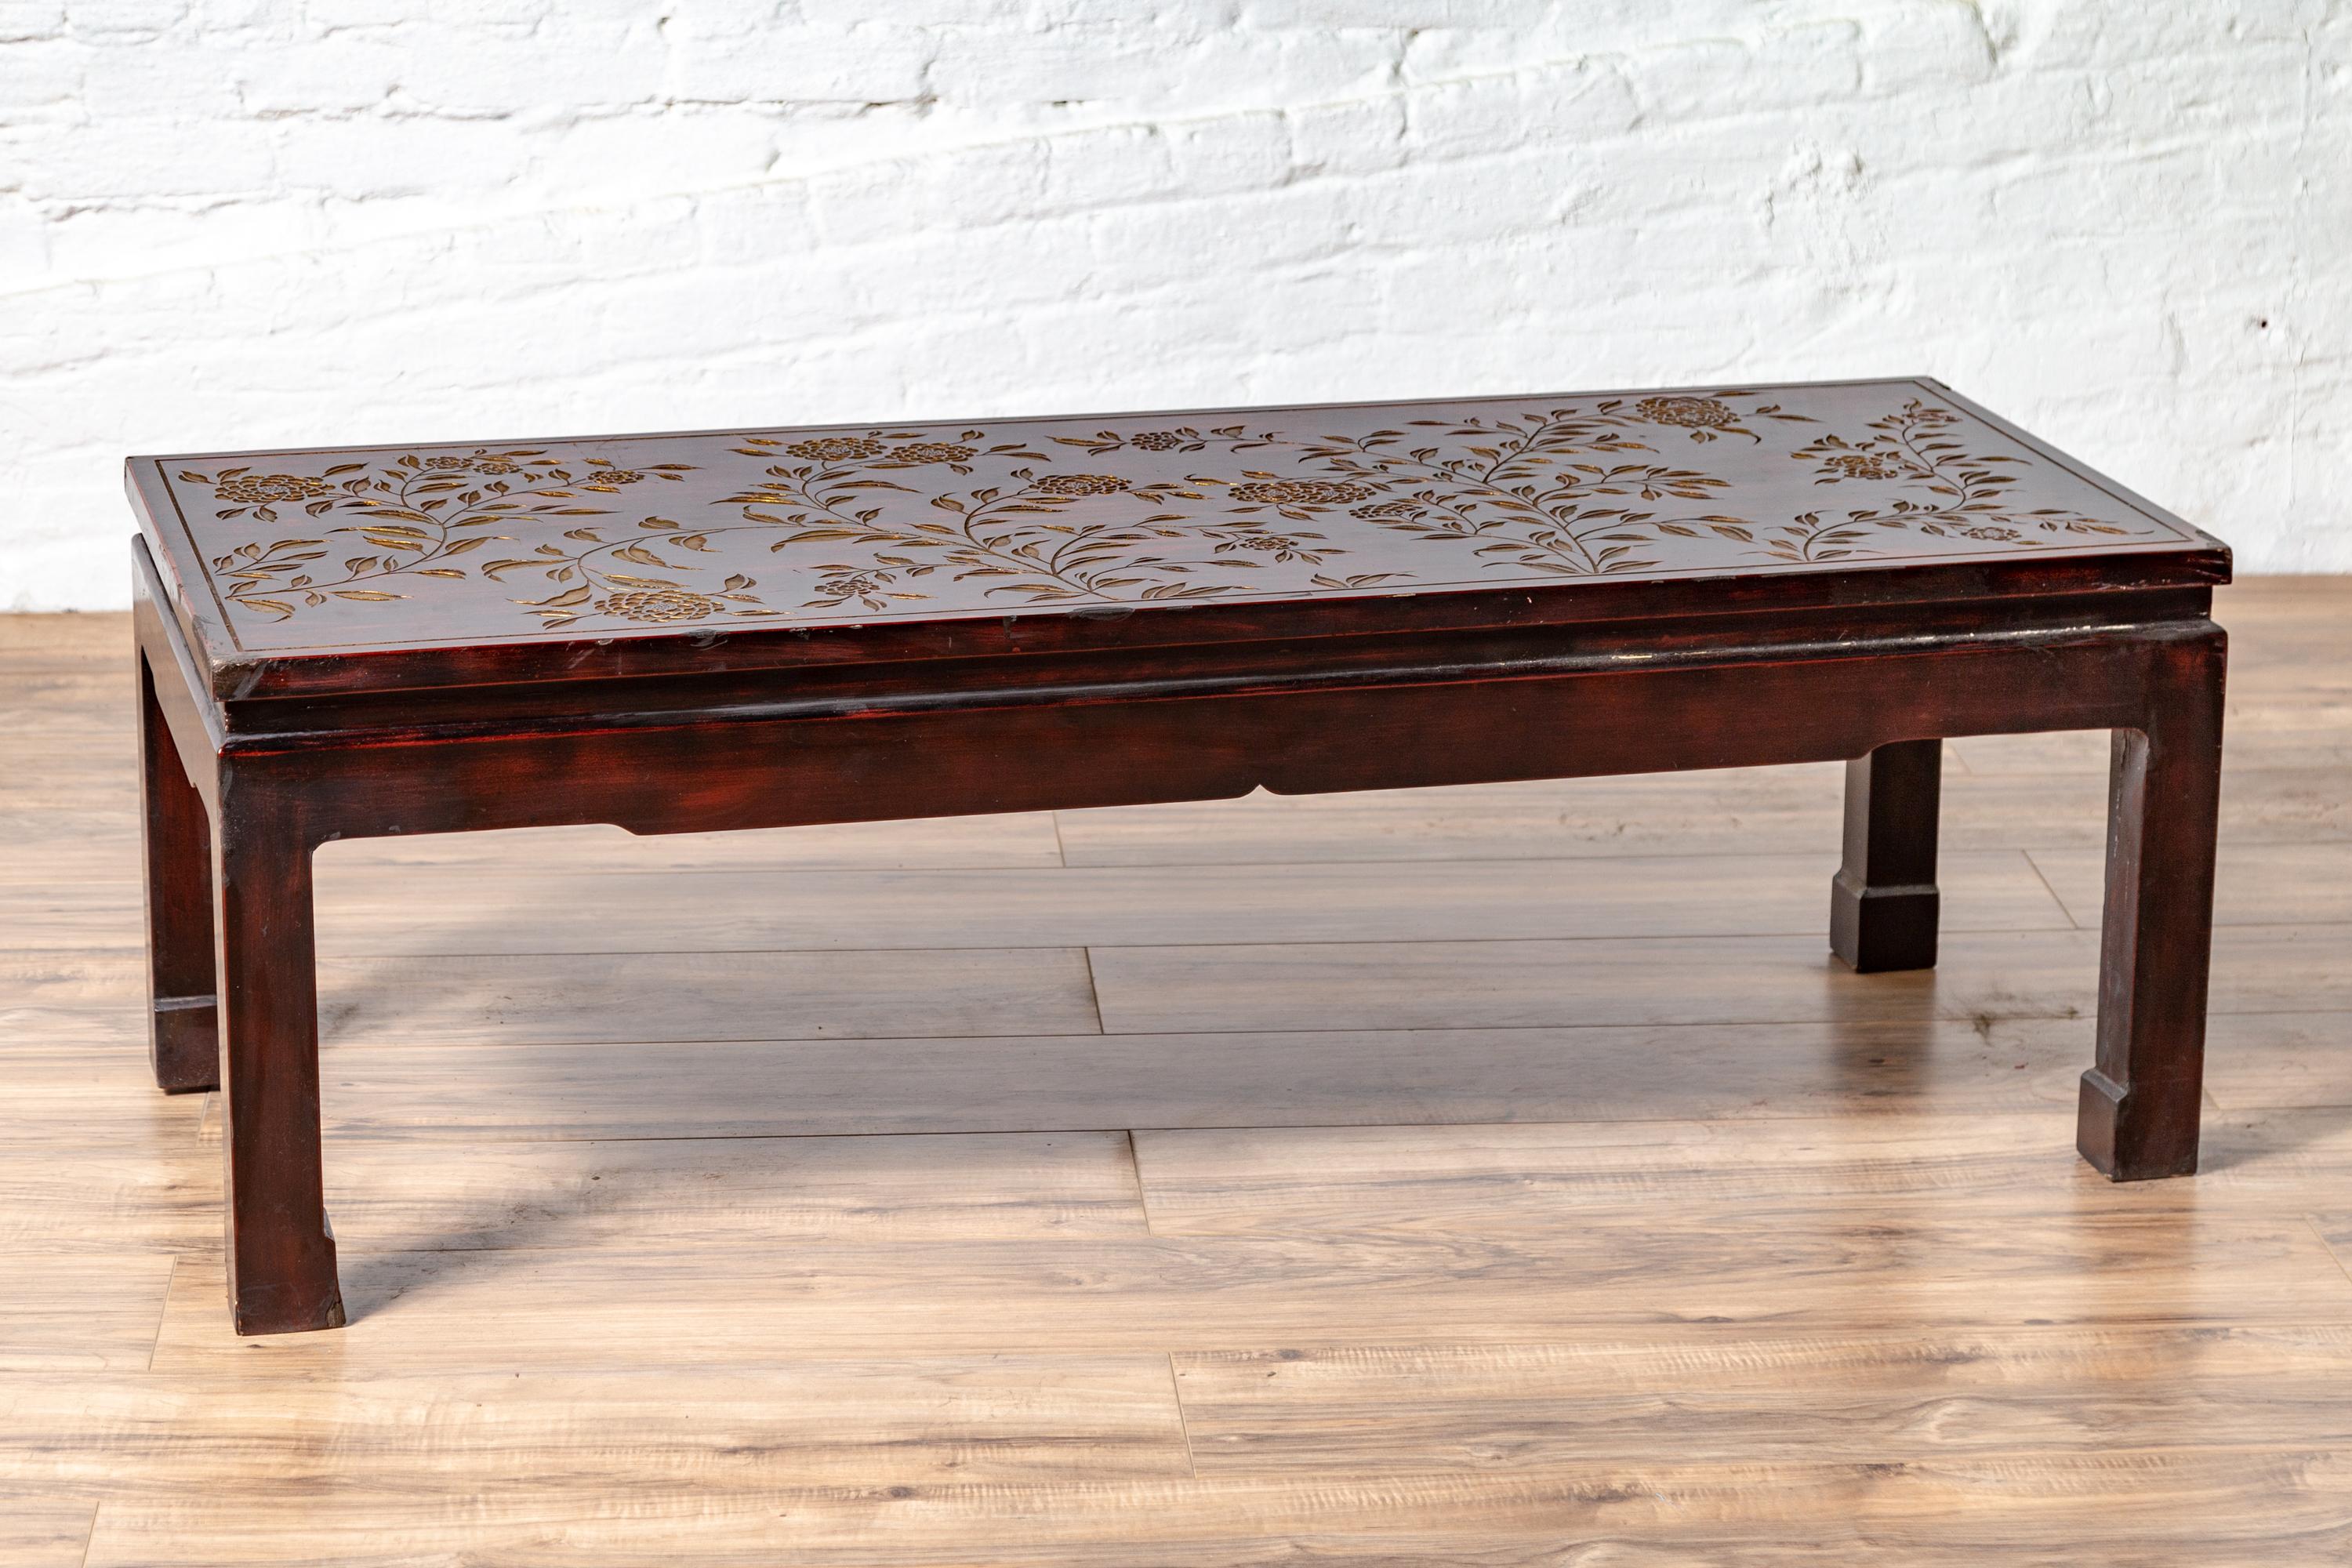 A Chinese vintage lacquered coffee table from the mid-20th century, with carved gilt floral motifs. Born in China during the mid-century period, this exquisite coffee table attracts our attention with its subtle charm and delicate décor. Presenting